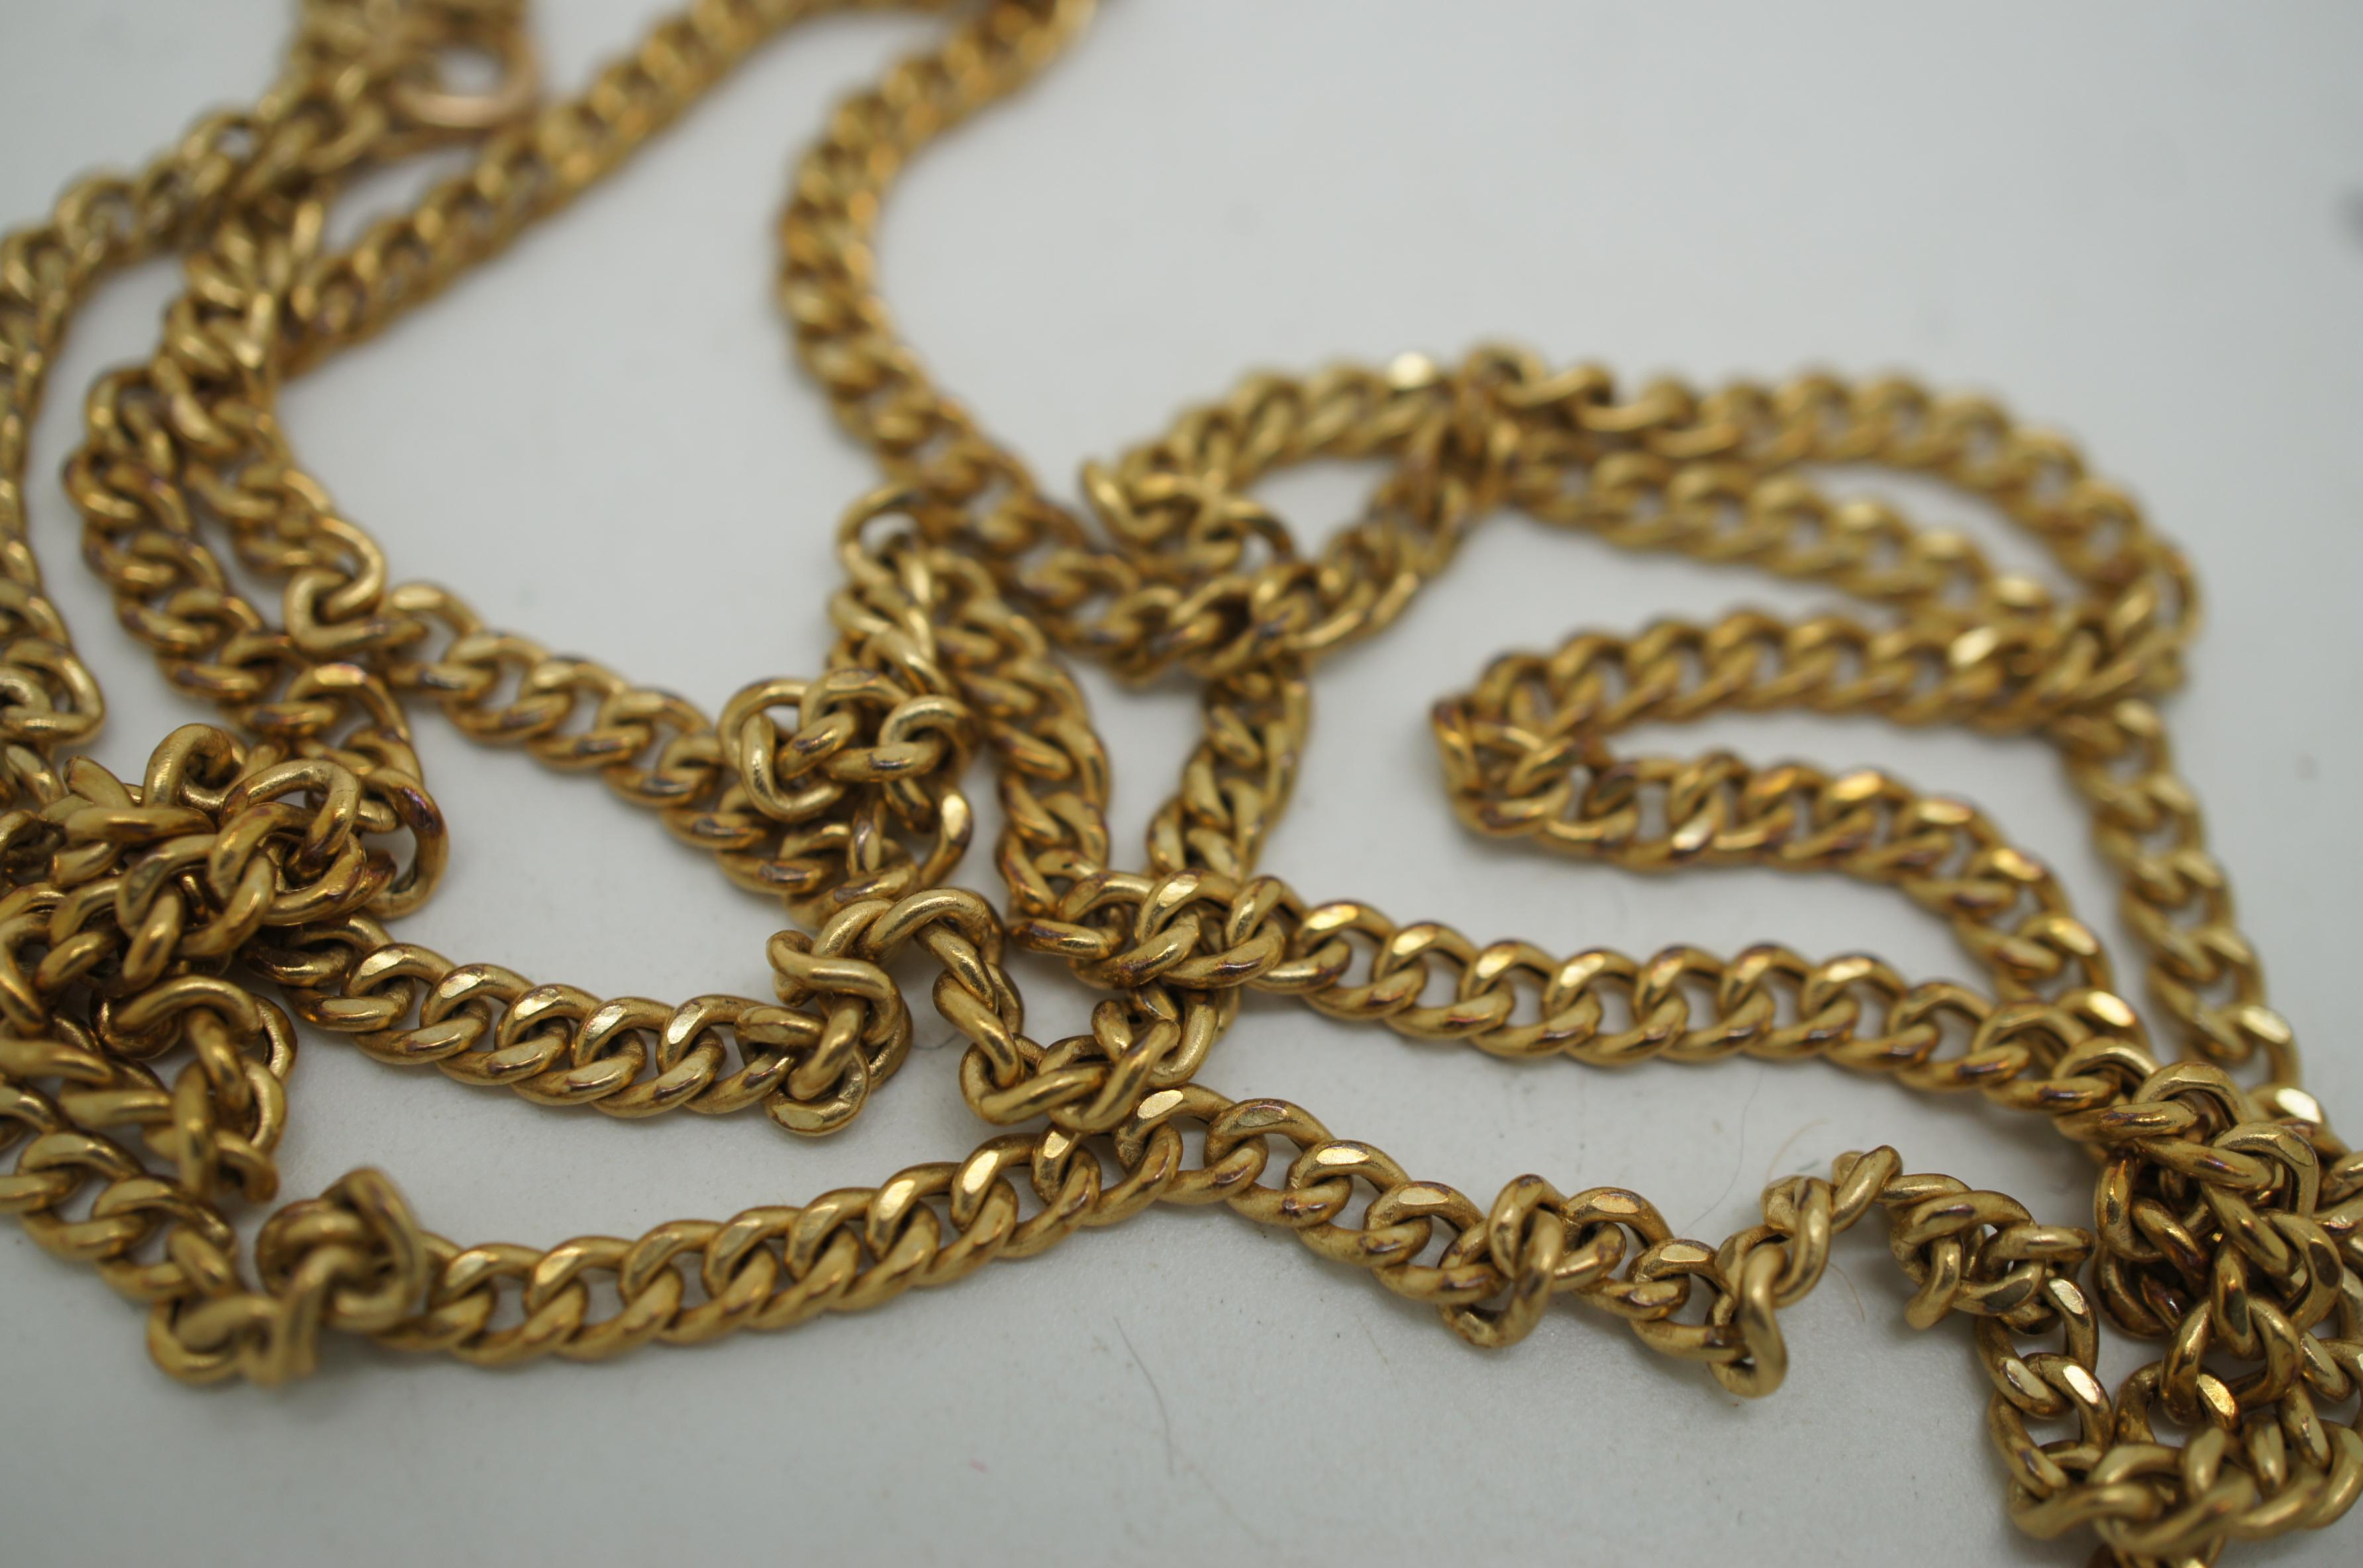 Vintage Italian 14K Yellow Gold Curb Link Chain Neckalce Italy 12g 30